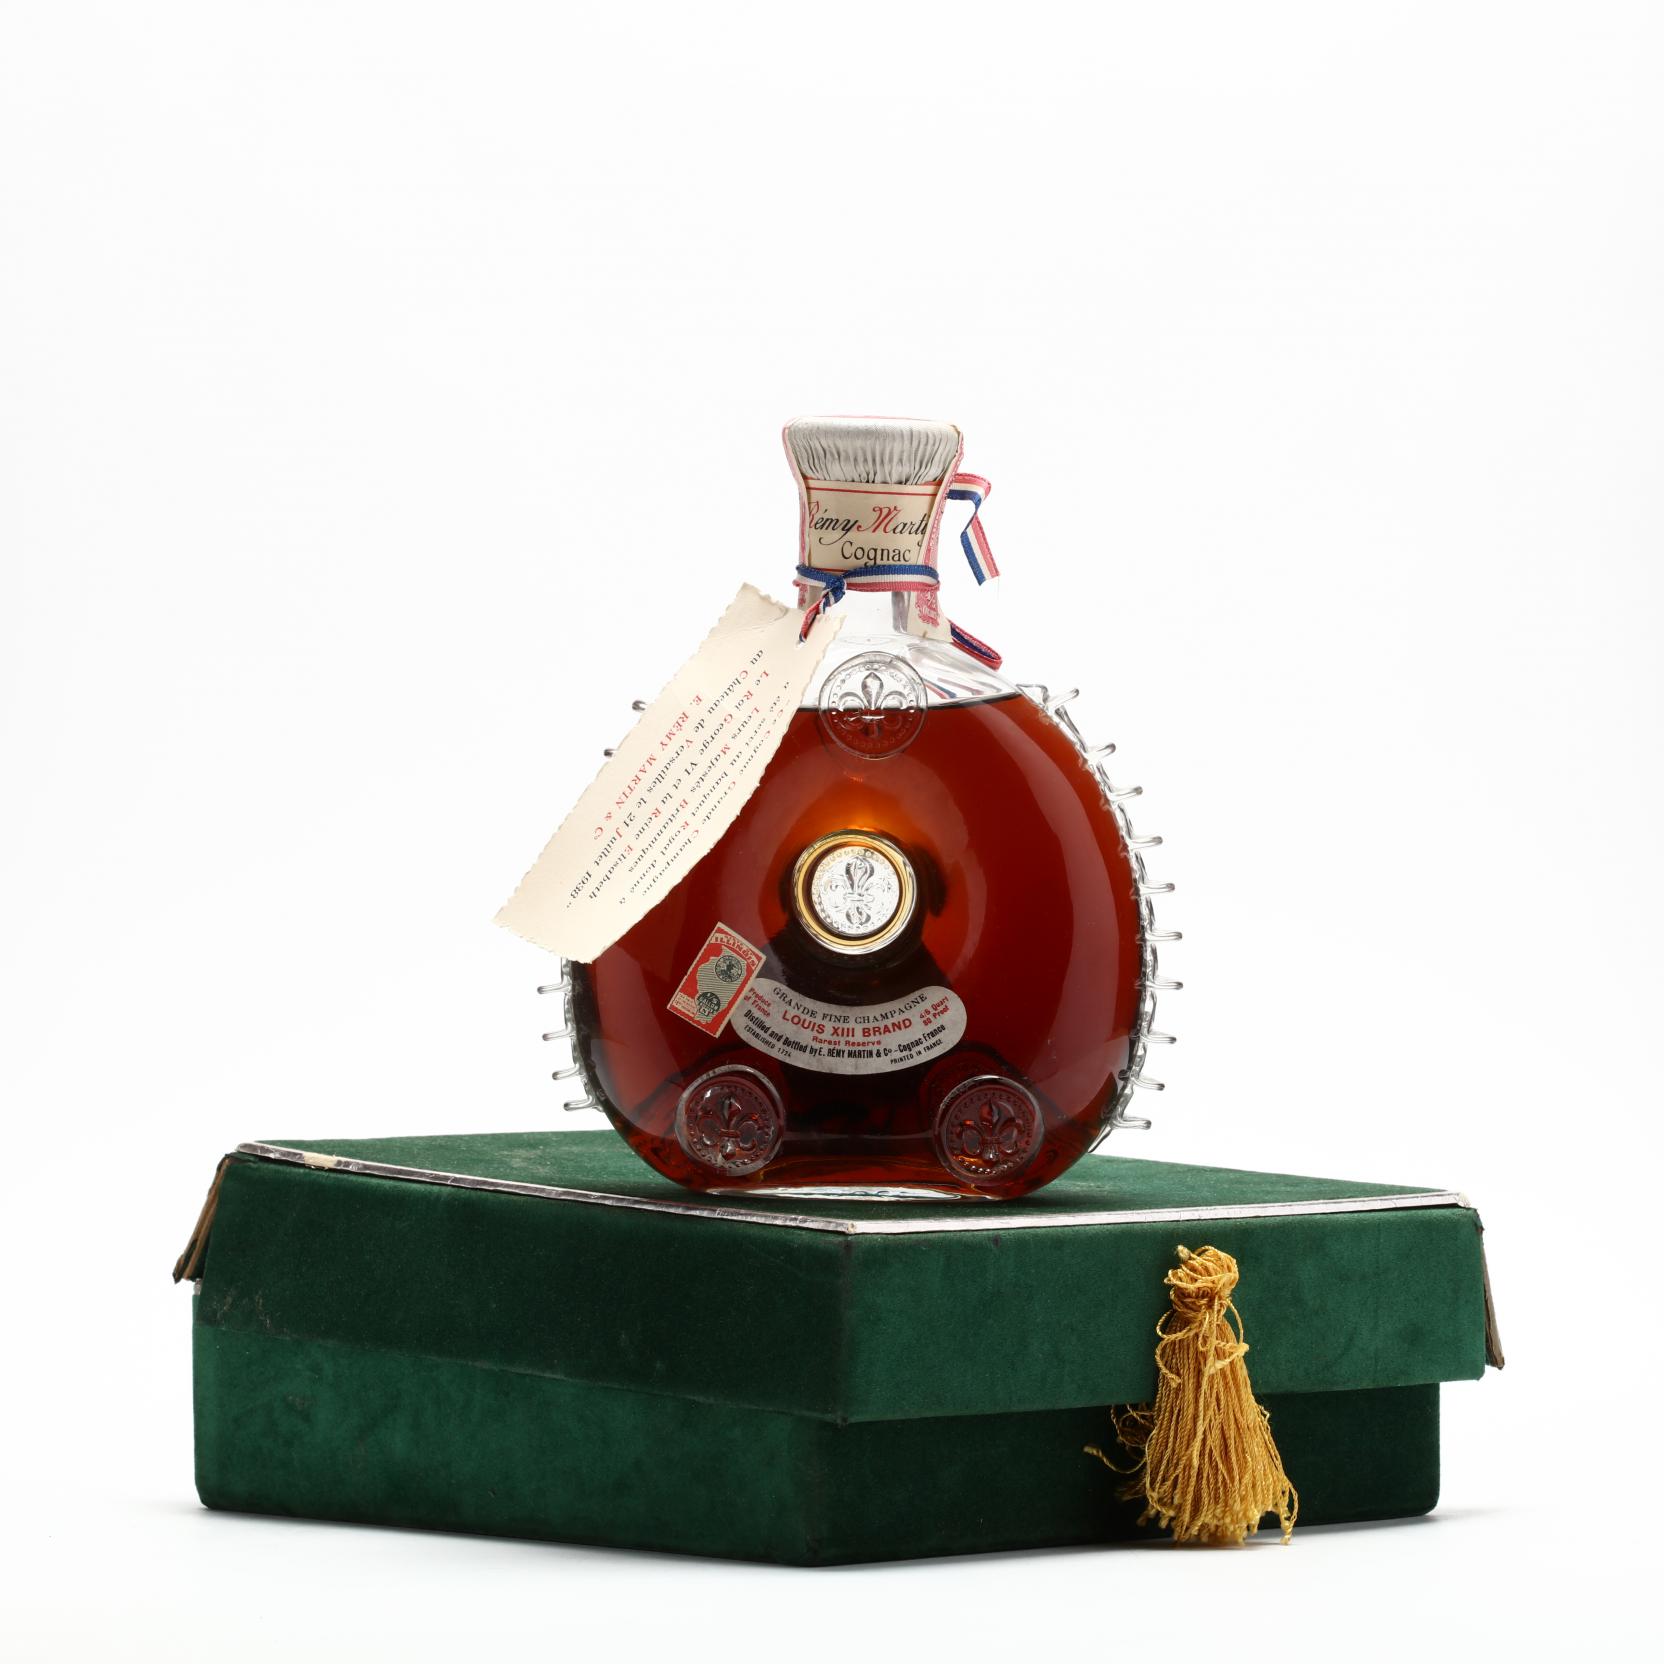 Sold at Auction: Baccarat, Baccarat Crystal LE Remy Martin Louis